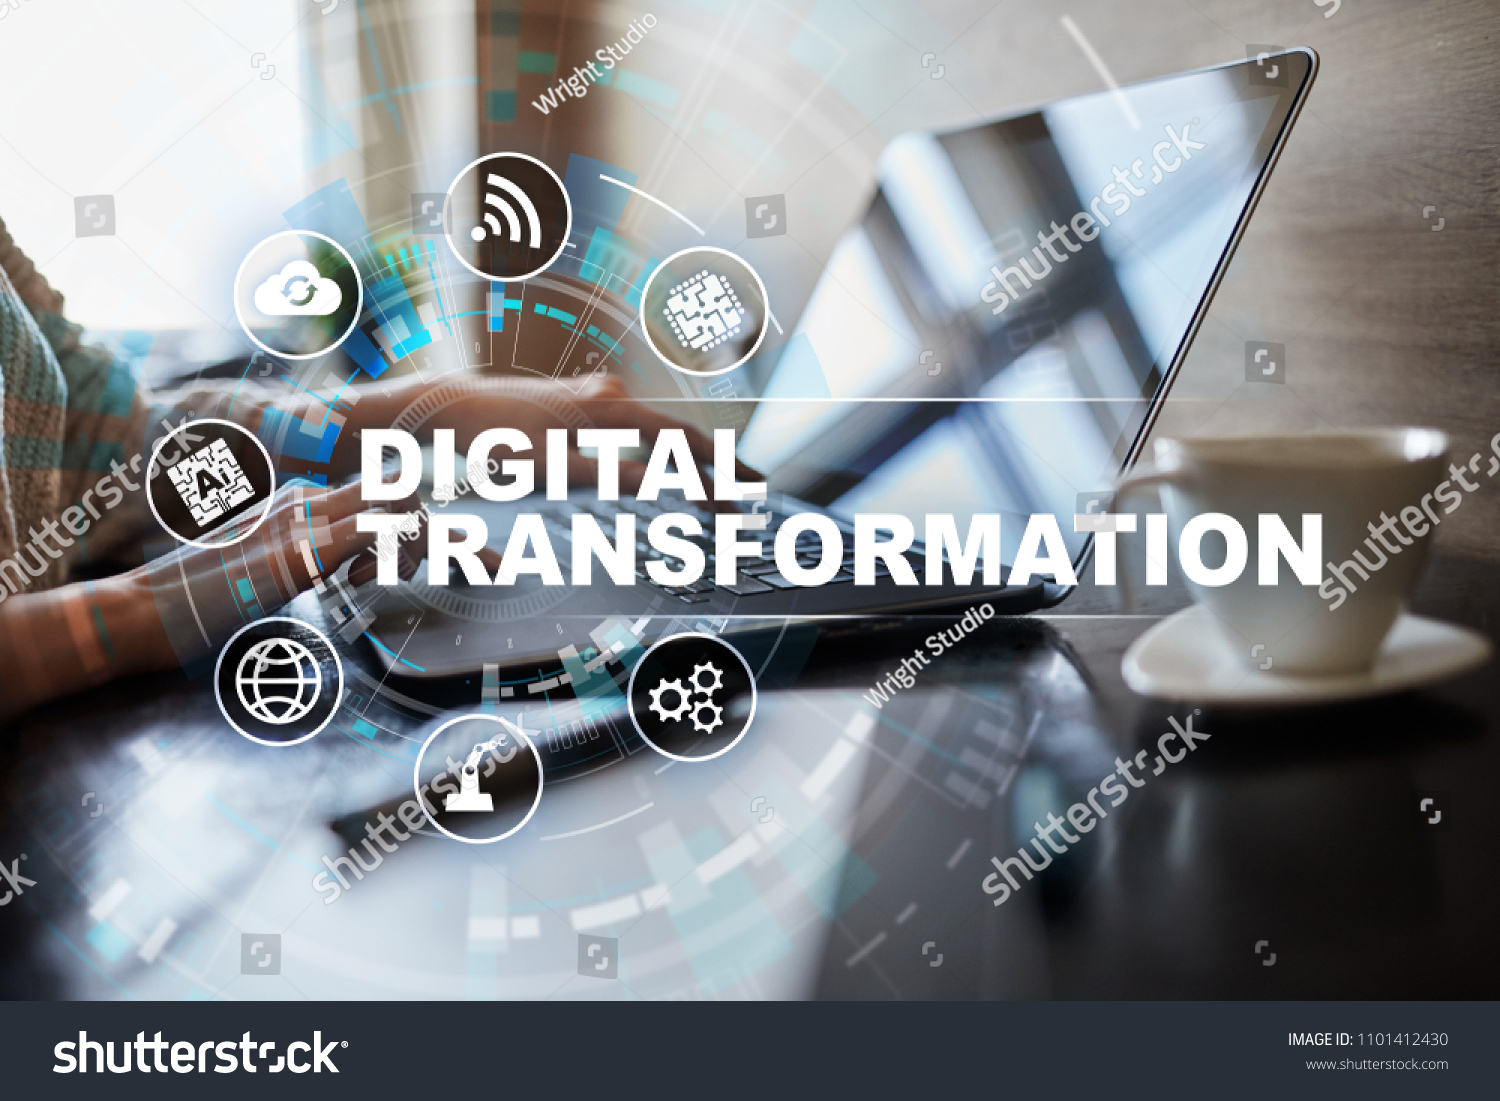 Digital transformation, Concept of digitization of business processes and modern technology. #1101412430